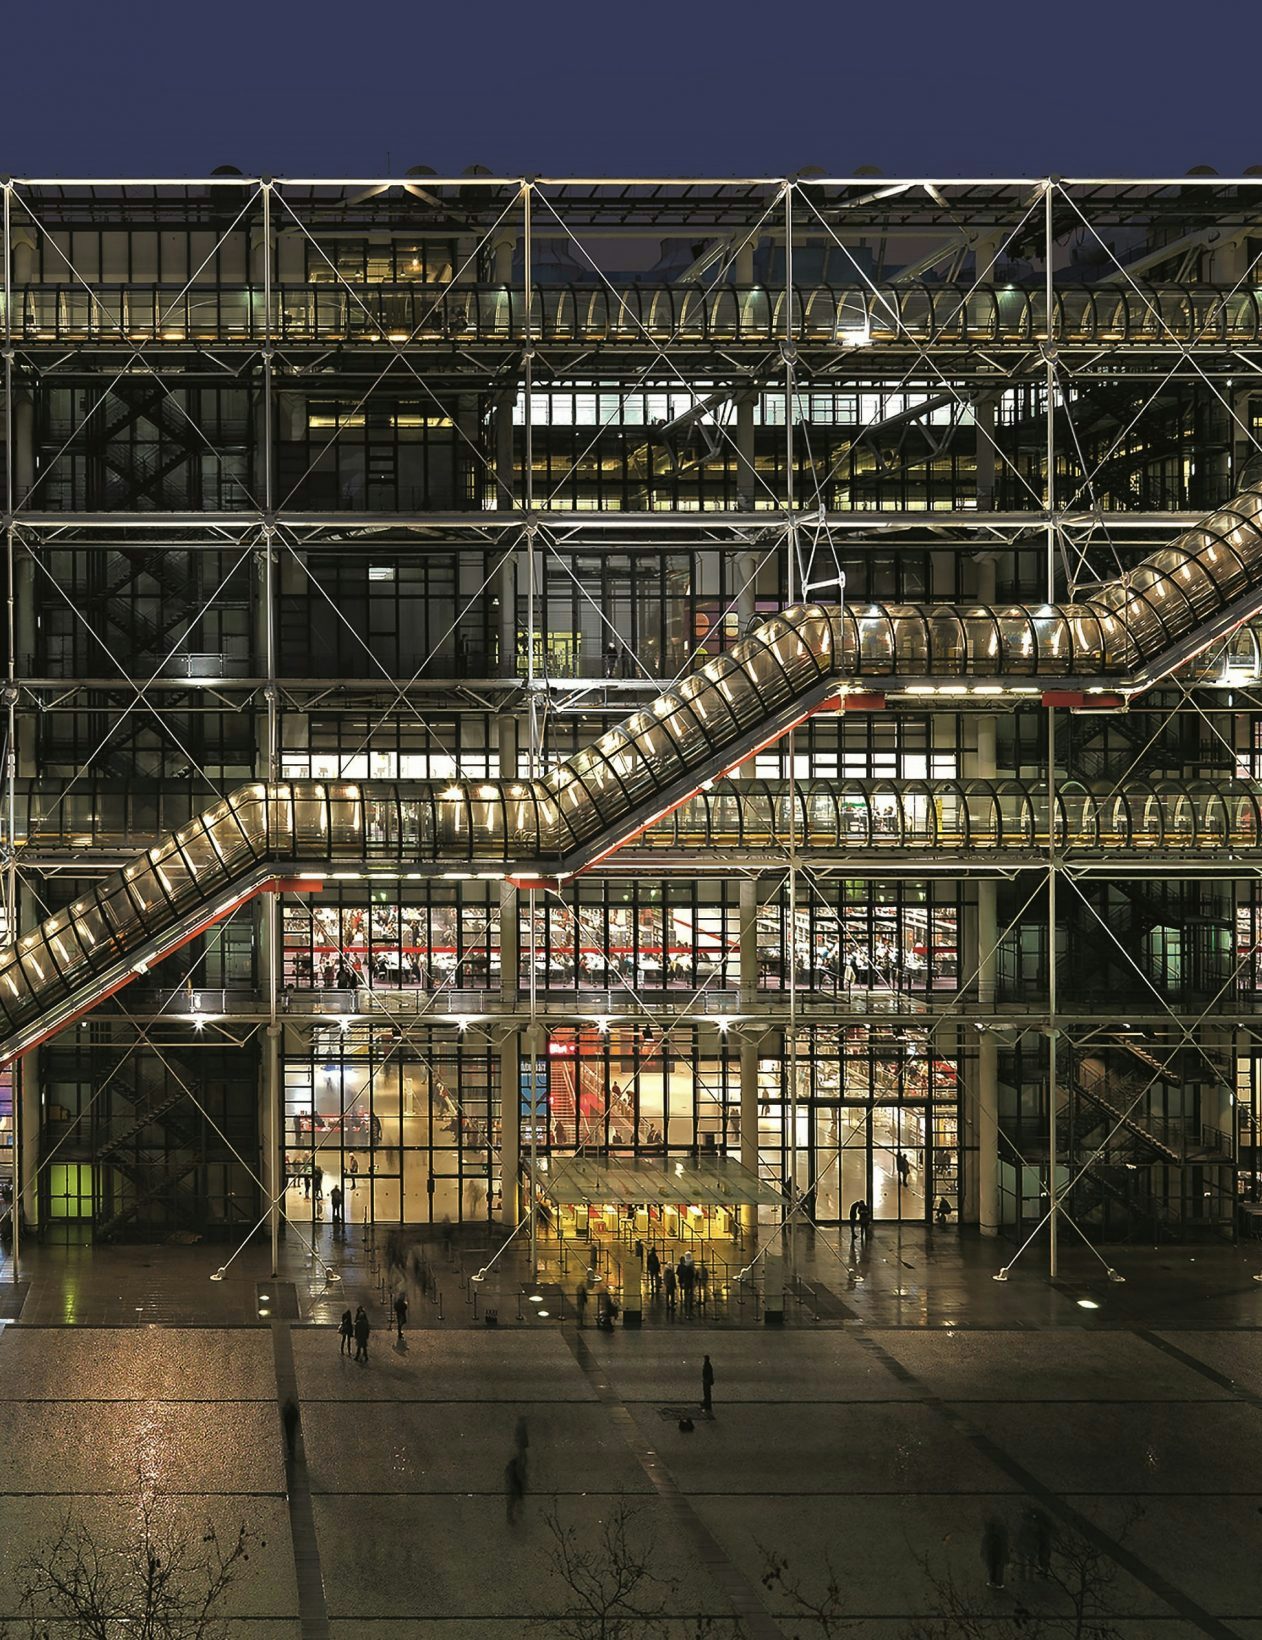 Mirabaud announces a multi-year partnership with the Centre Pompidou